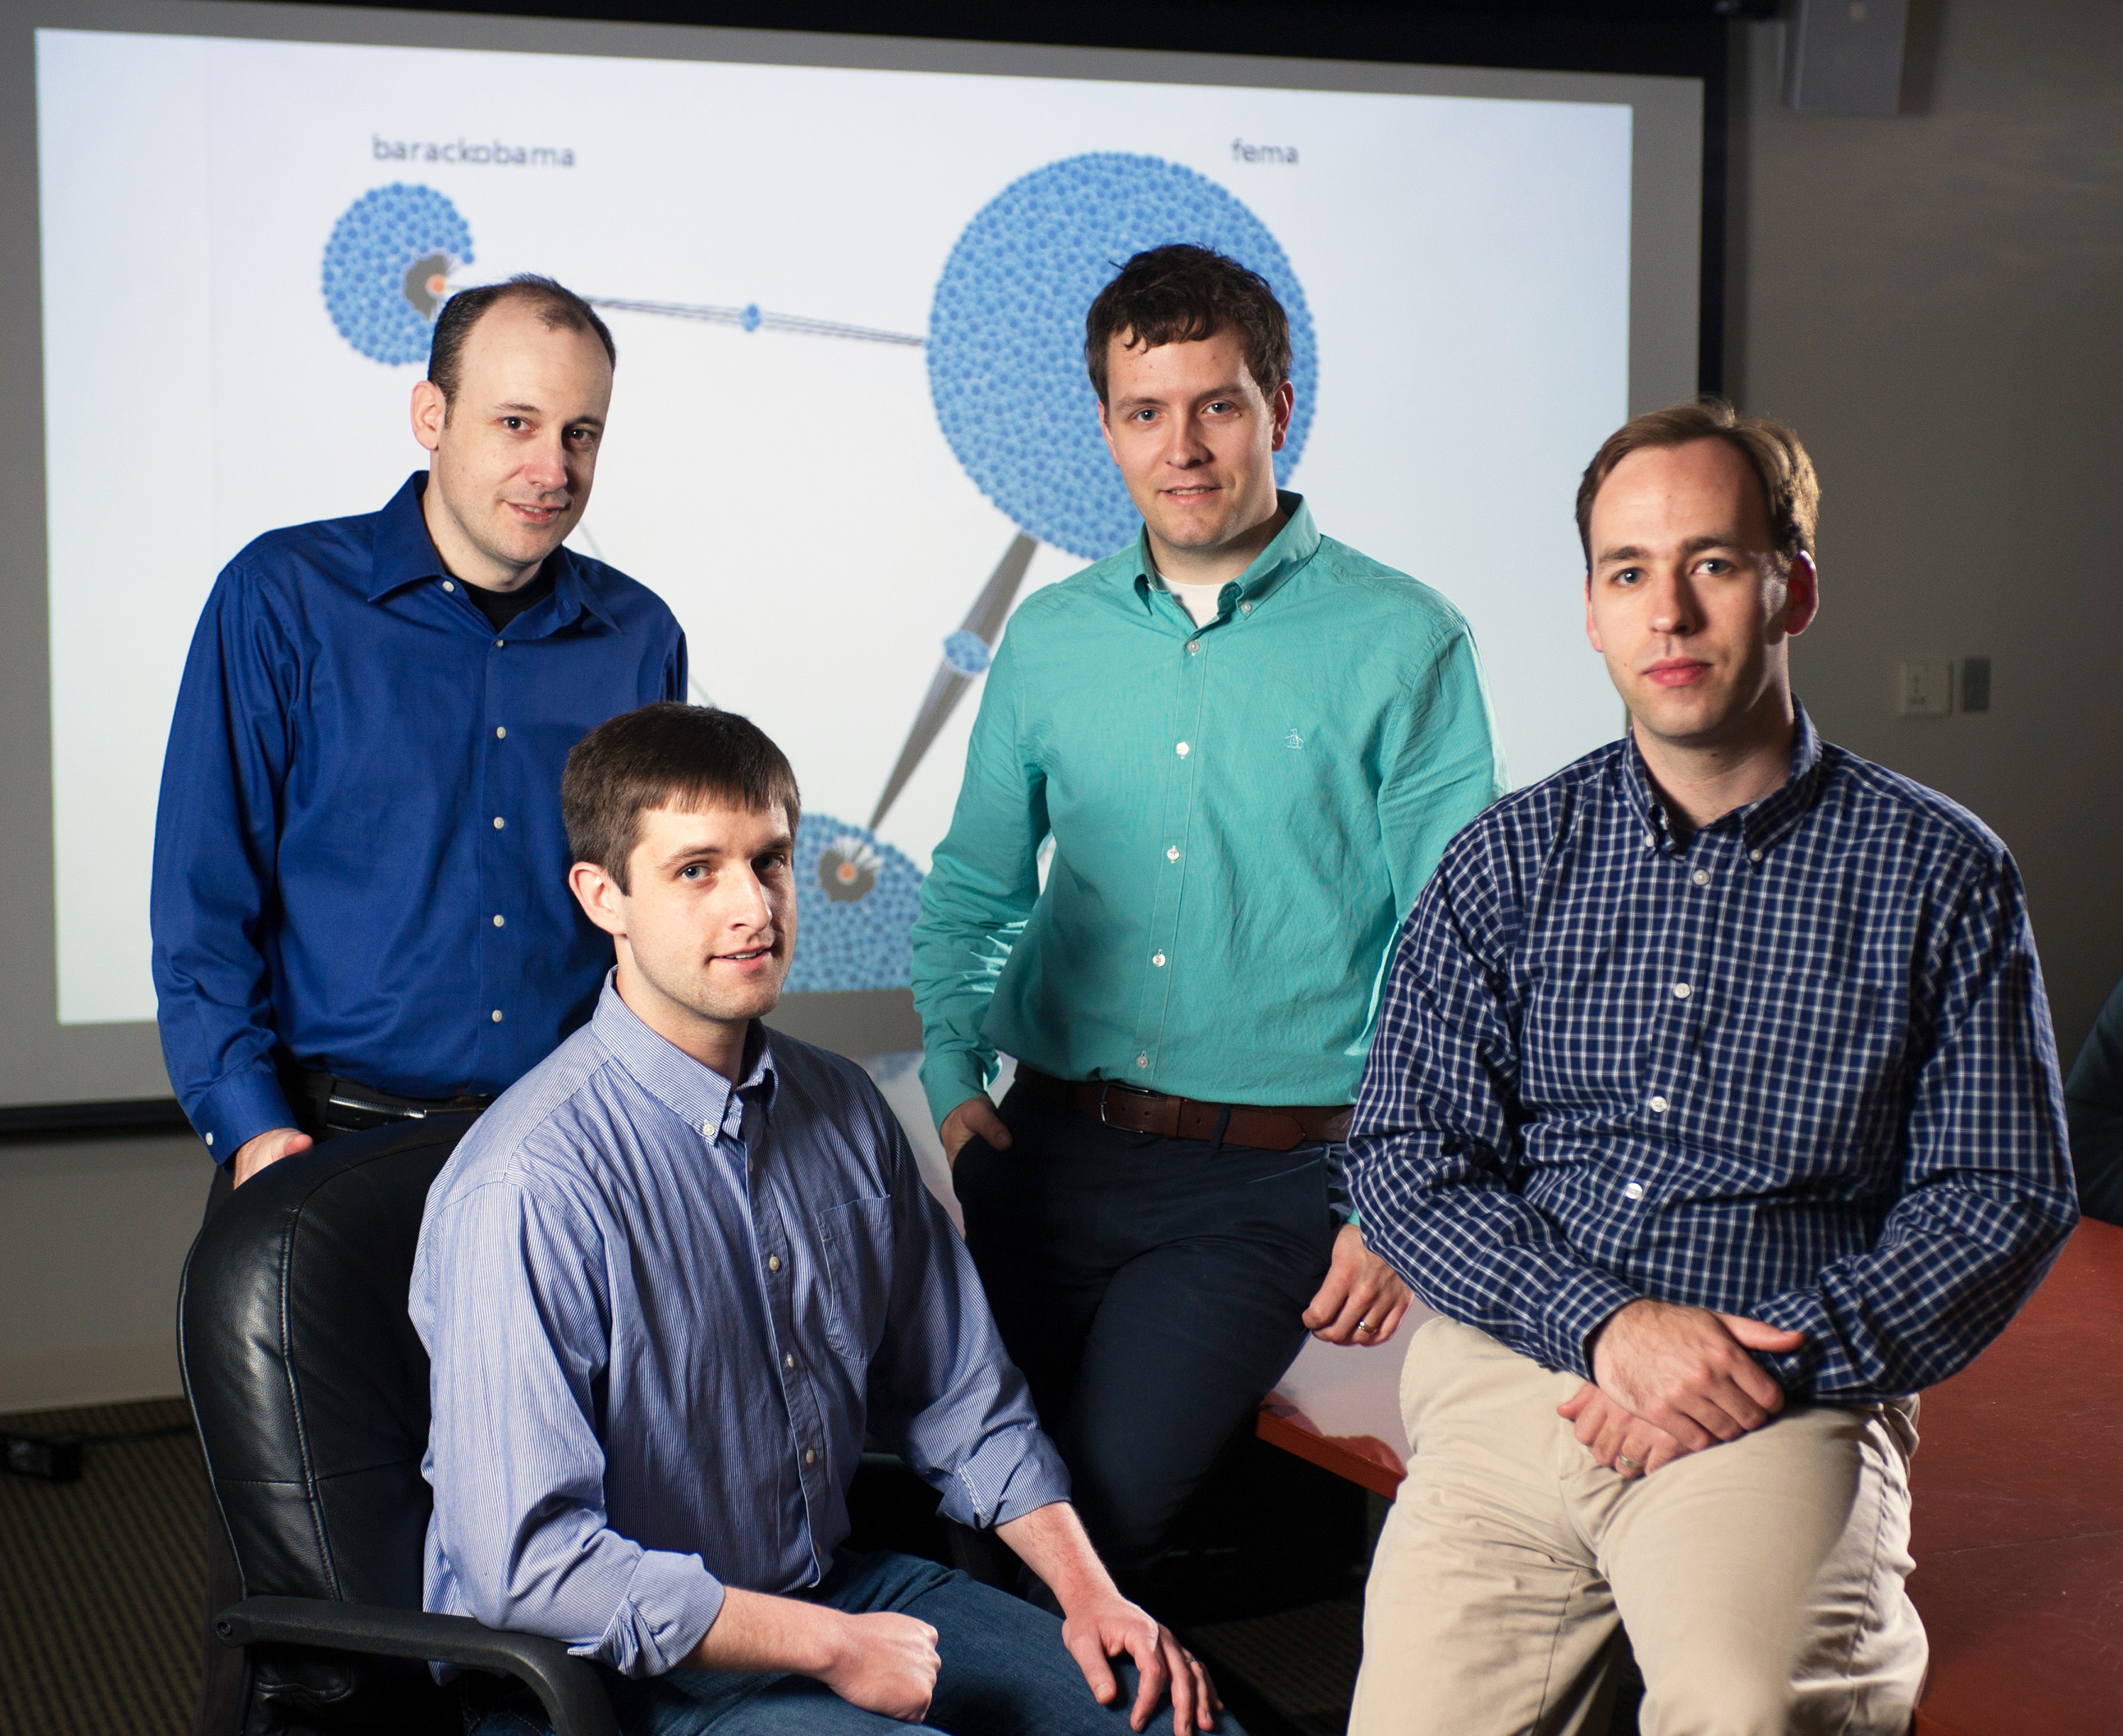 A GTRI team consisting of (left to right) Dan Campbell, Rob McColl, Jason Poovey, and David Ediger is bringing graph analytics to bear on a range of data-related challenges including social networks, surveillance intelligence, computer-network functionality, and industrial control systems.